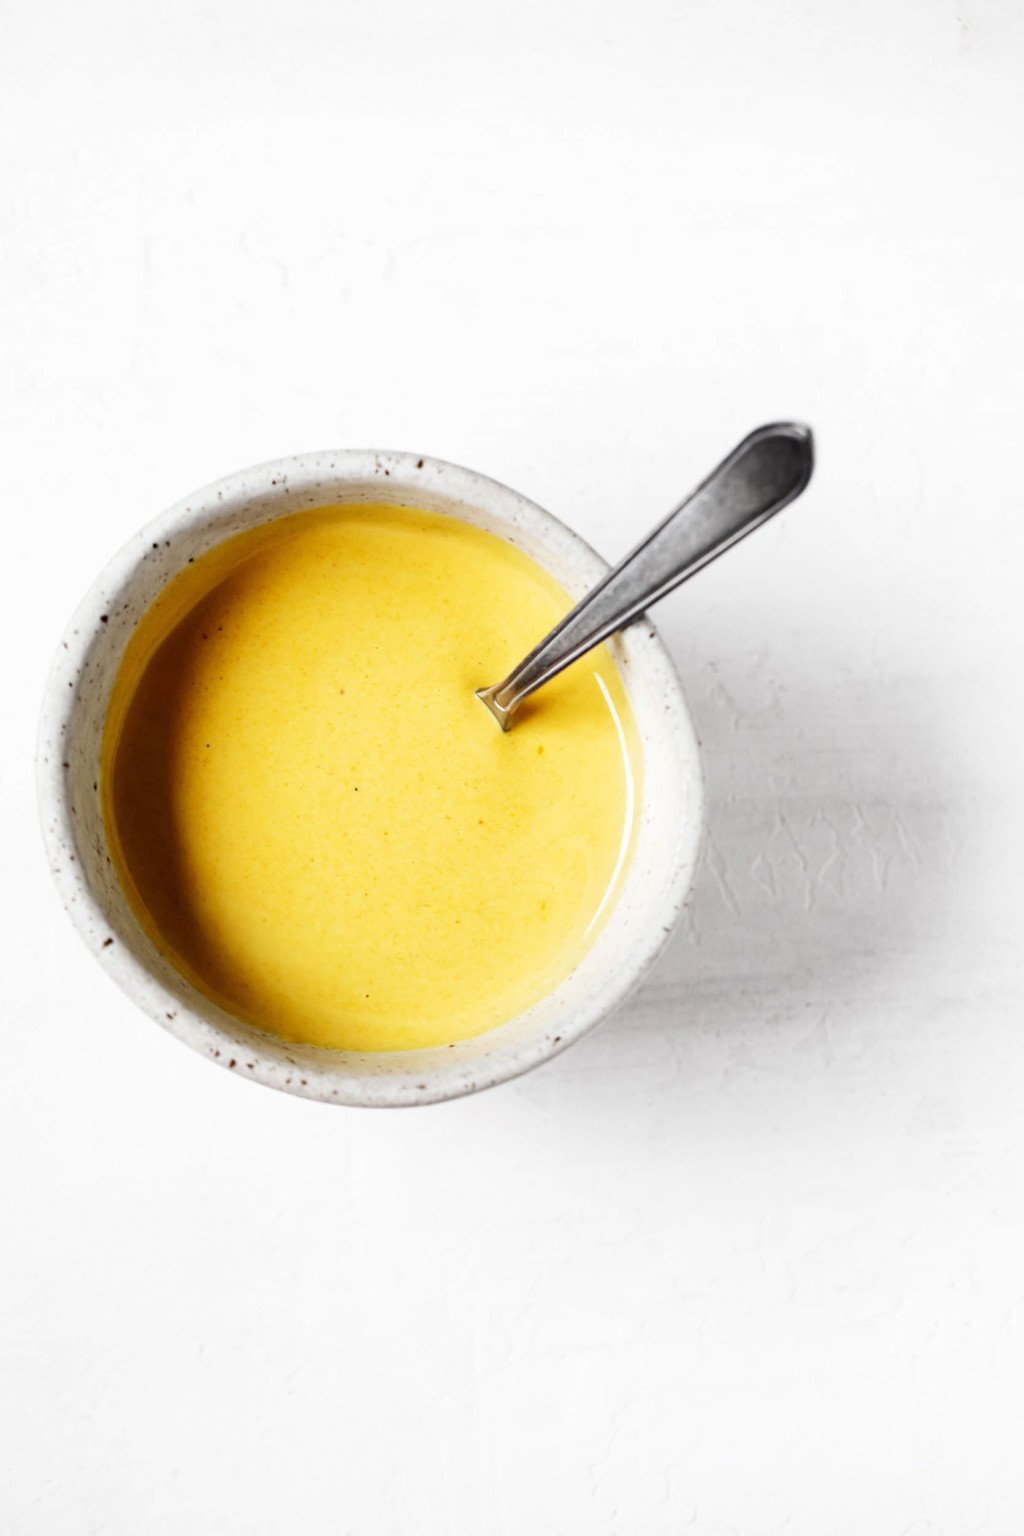 An overhead image of a small bowl containing a bright yellow colored dressing and a serving spoon.